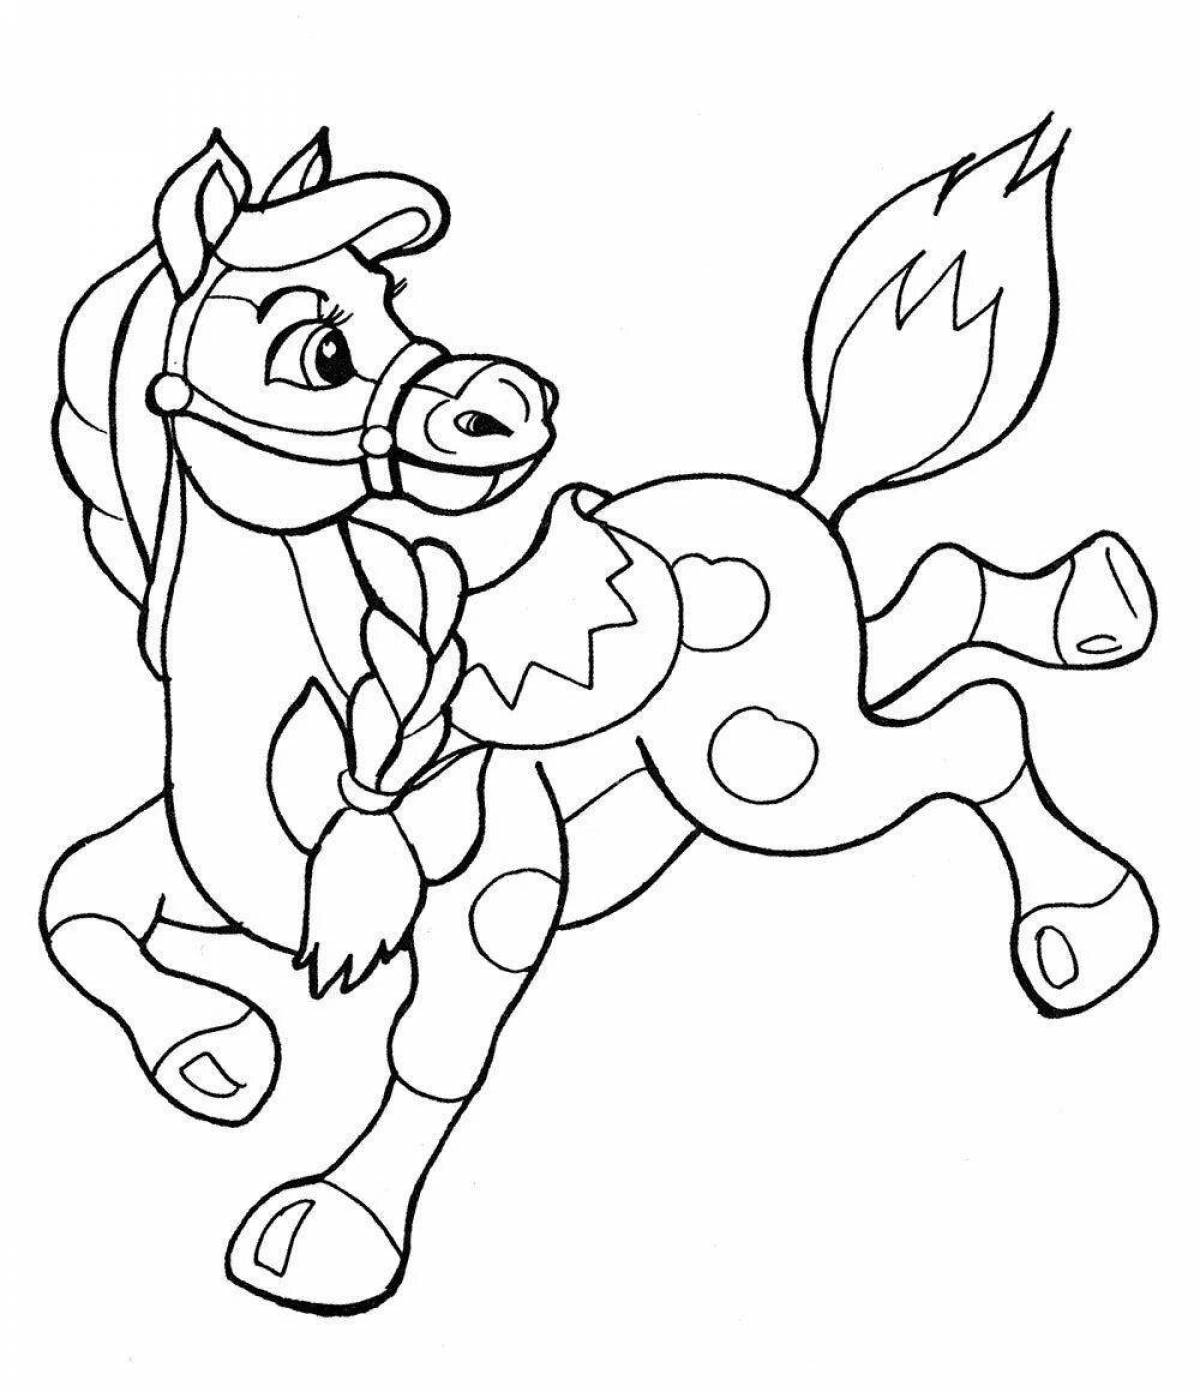 Exquisite coloring horse for children 6-7 years old